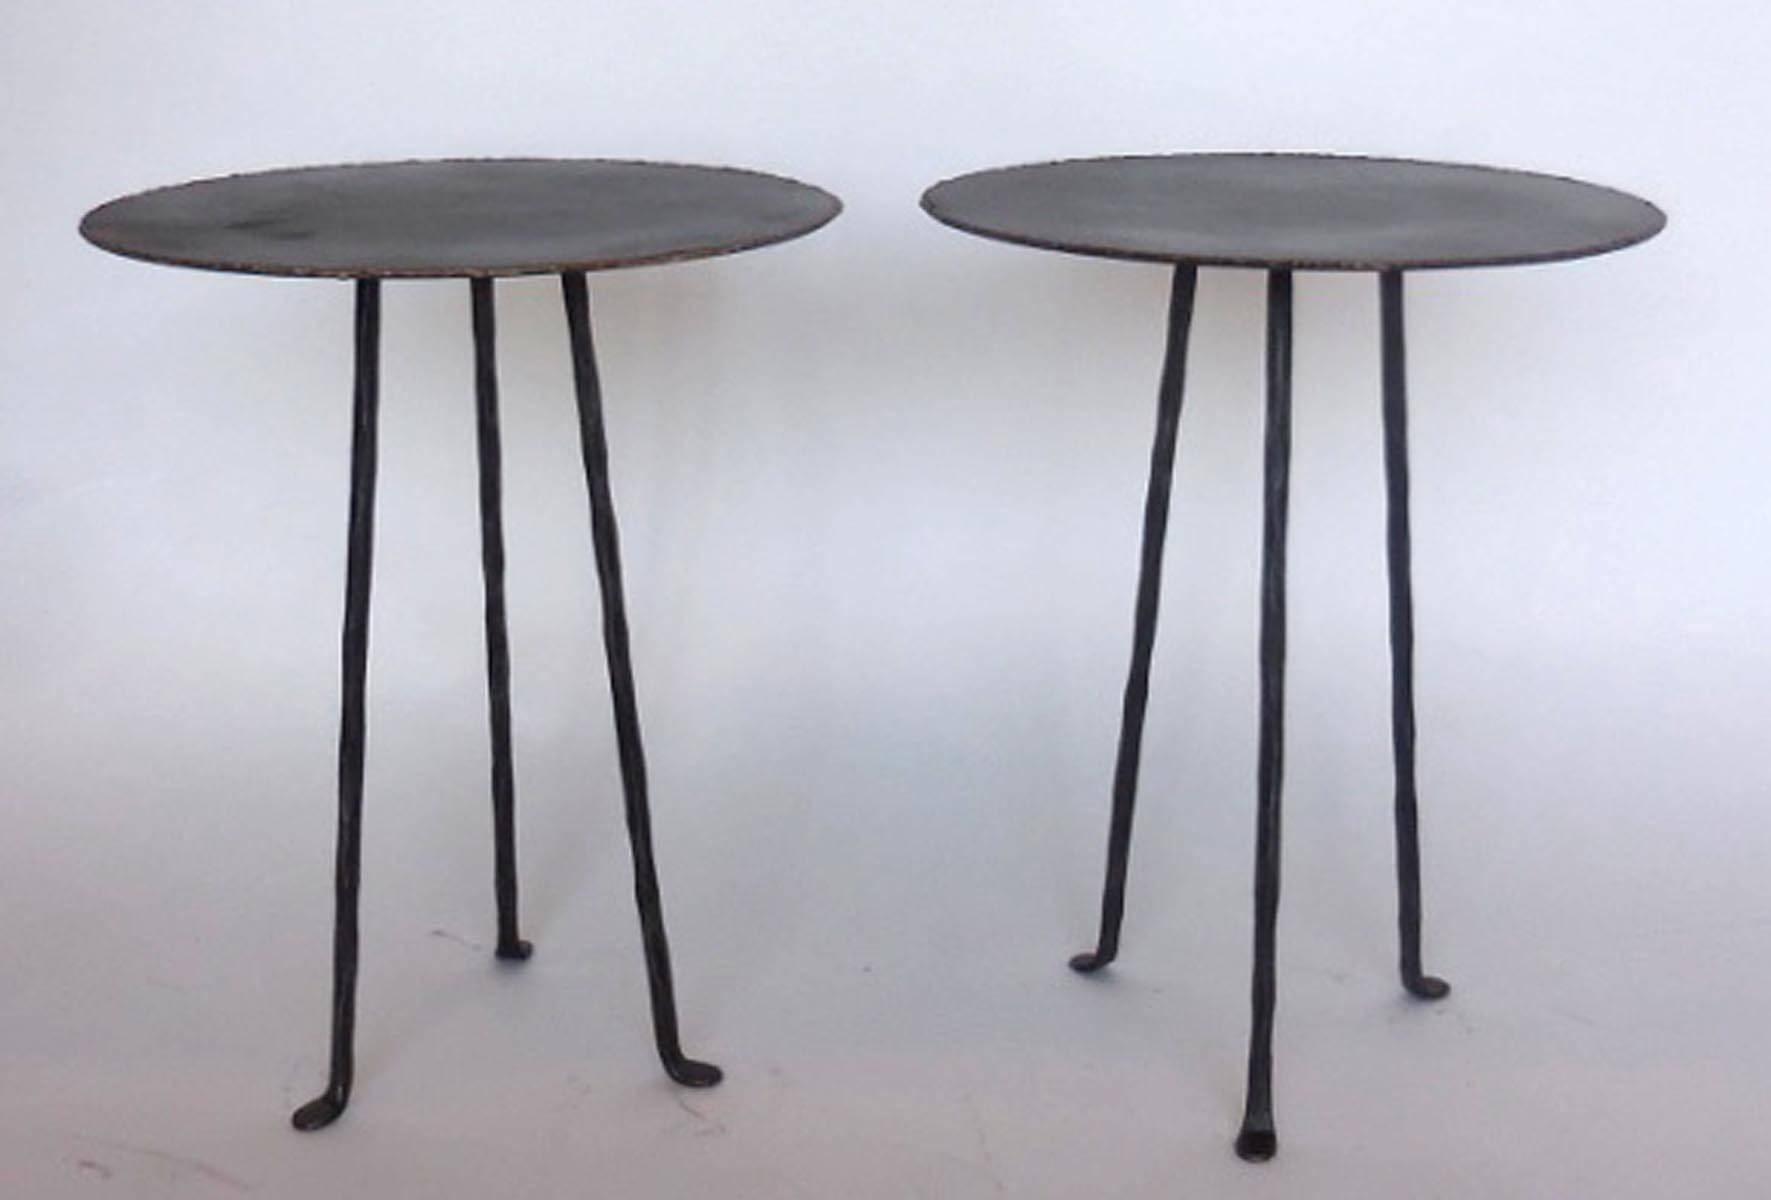 Custom hand-forged iron tripod tables with bronze edging. Can be made in custom sizes, round or square.  Sold separately. Made in Los Angeles by Dos Gallos Studio.
CUSTOM PRICES ARE SUBJECT TO CHANGE. PLEASE INQUIRE BEFORE ORDERING. ALL CUSTOM